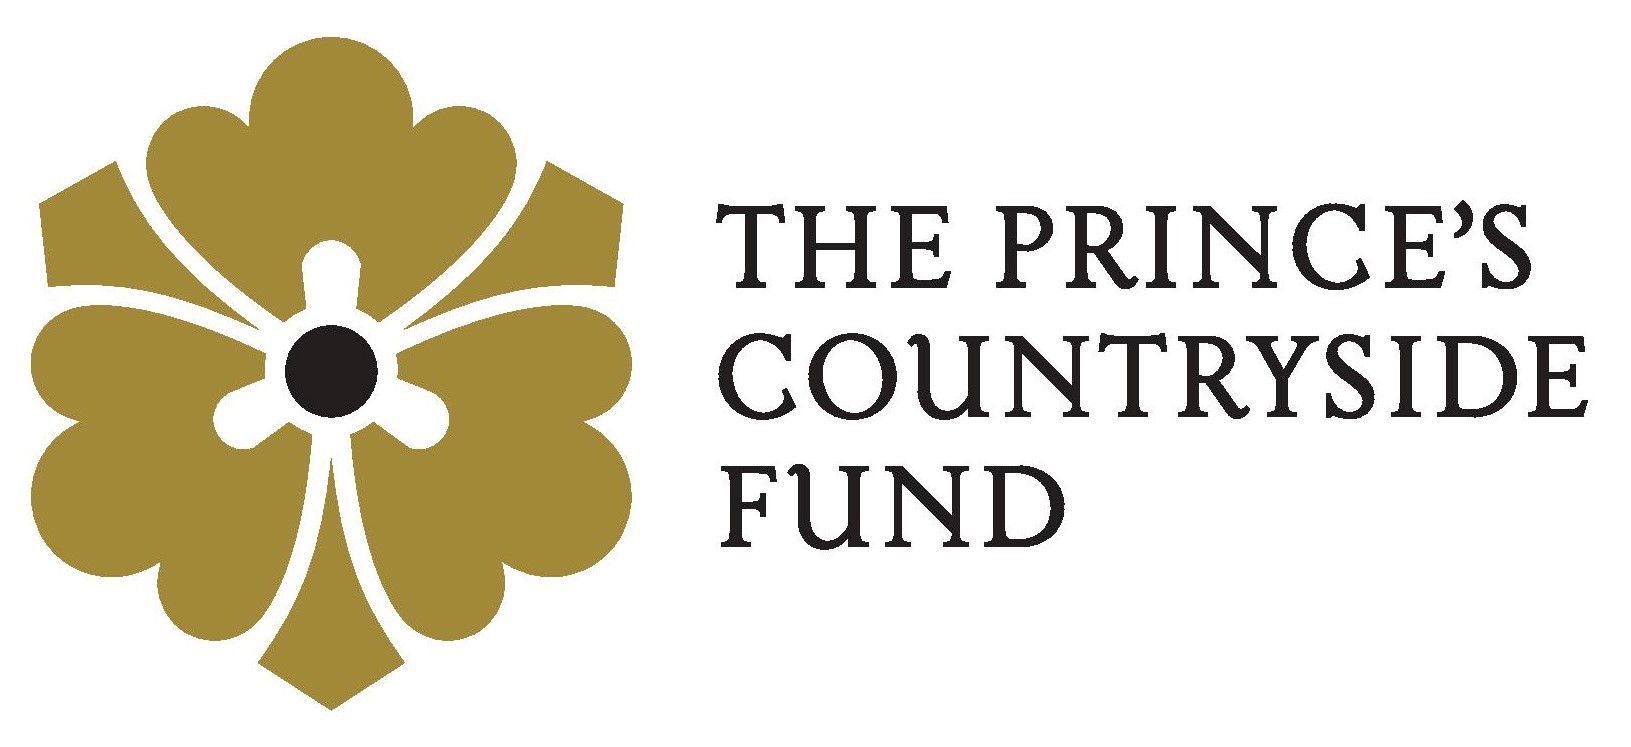 The Prince's Countryside Fund logo